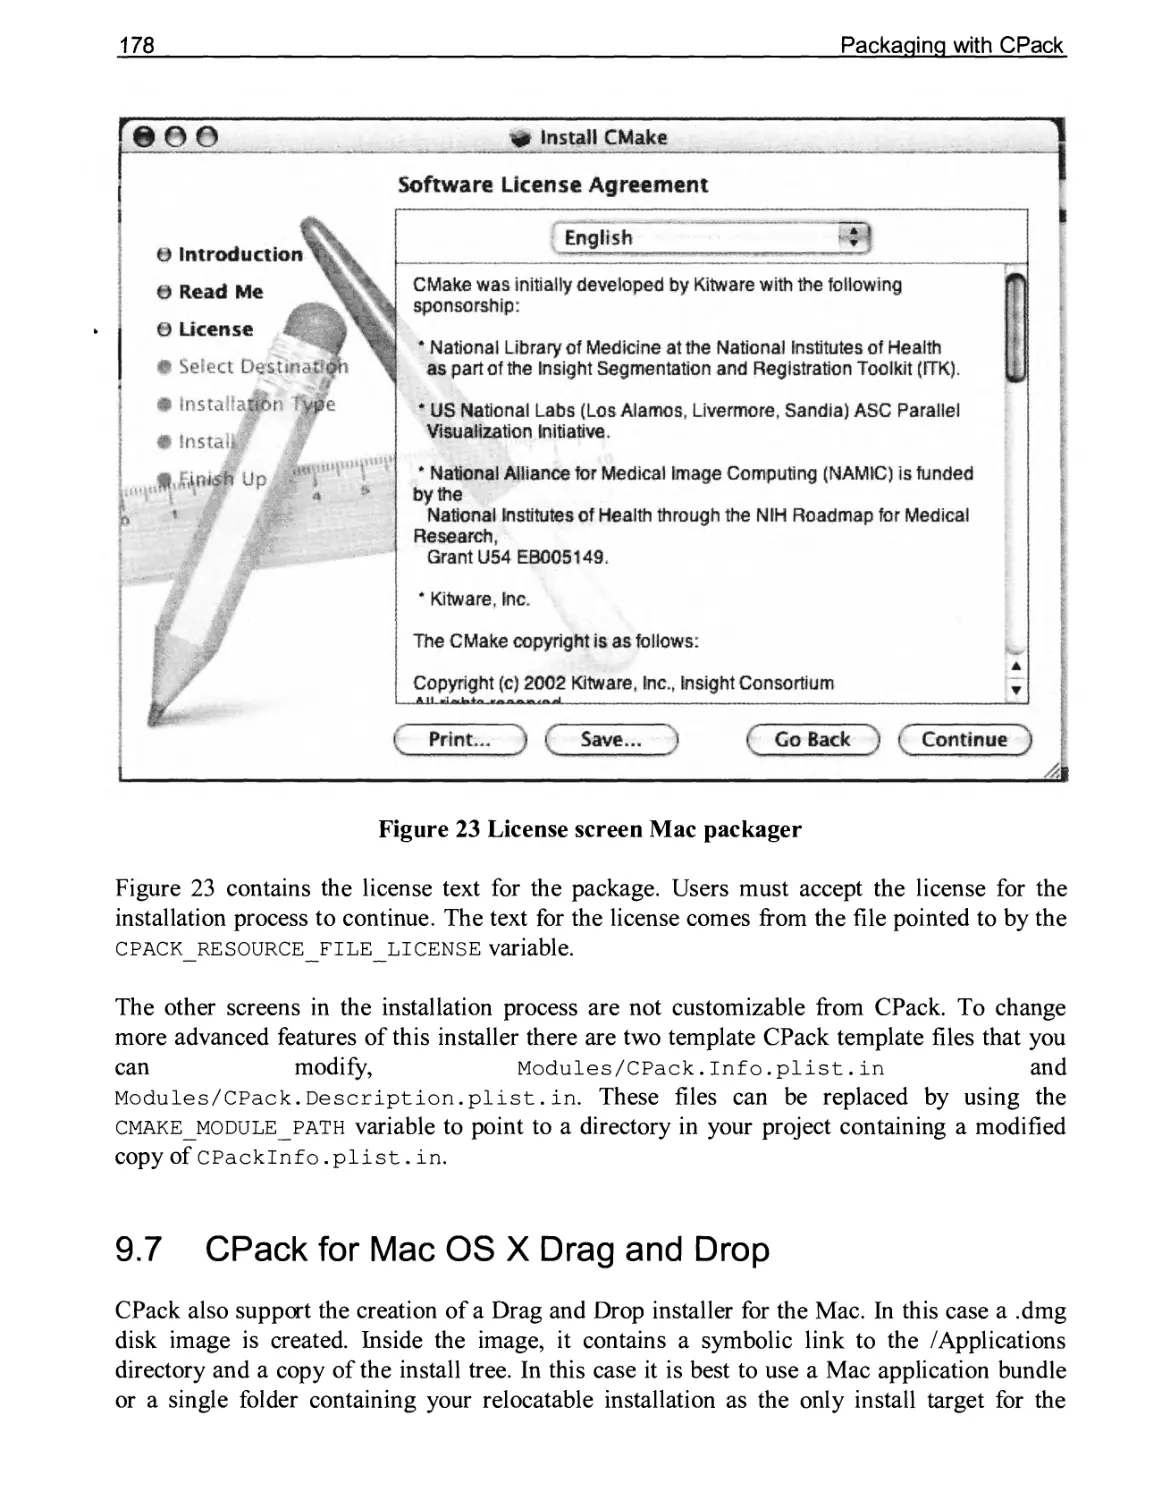 9.7 CPack for Mac OS X Drag and Drop